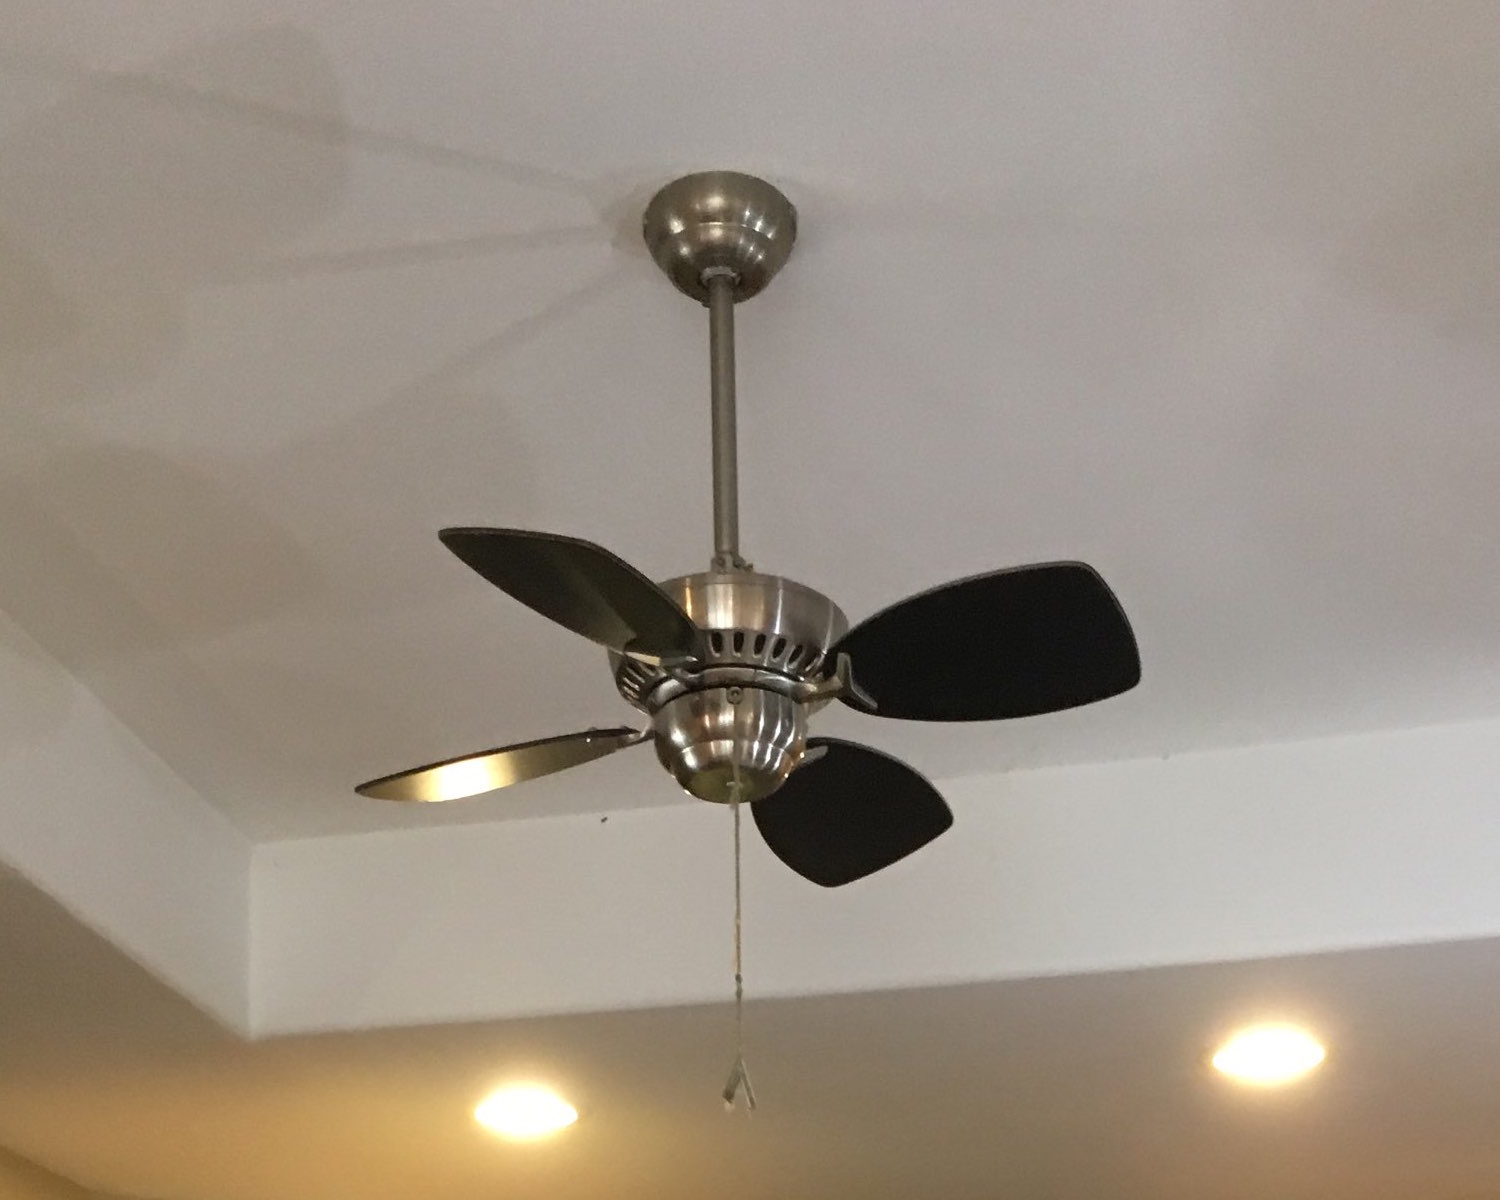 Ceiling Fans, Why Did My Ceiling Fan Stop Working